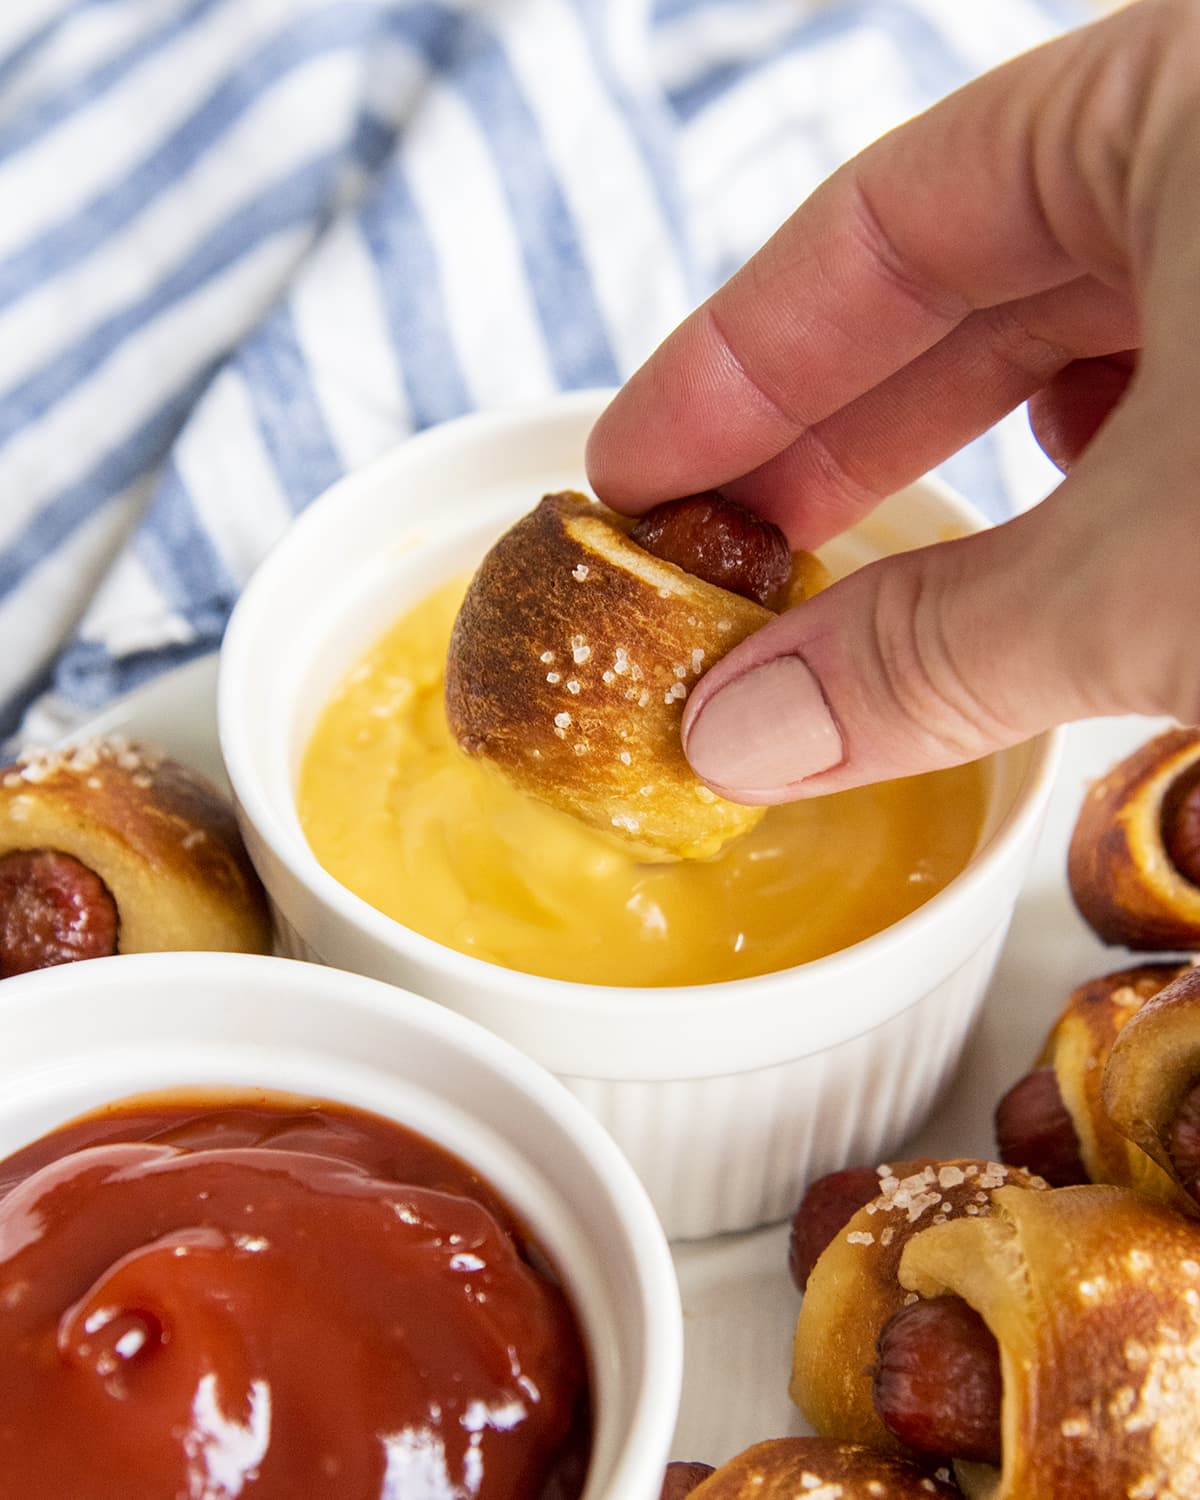 A hand holding a pretzel pigs in a blanket dipping into a bowl of nacho cheese sauce.